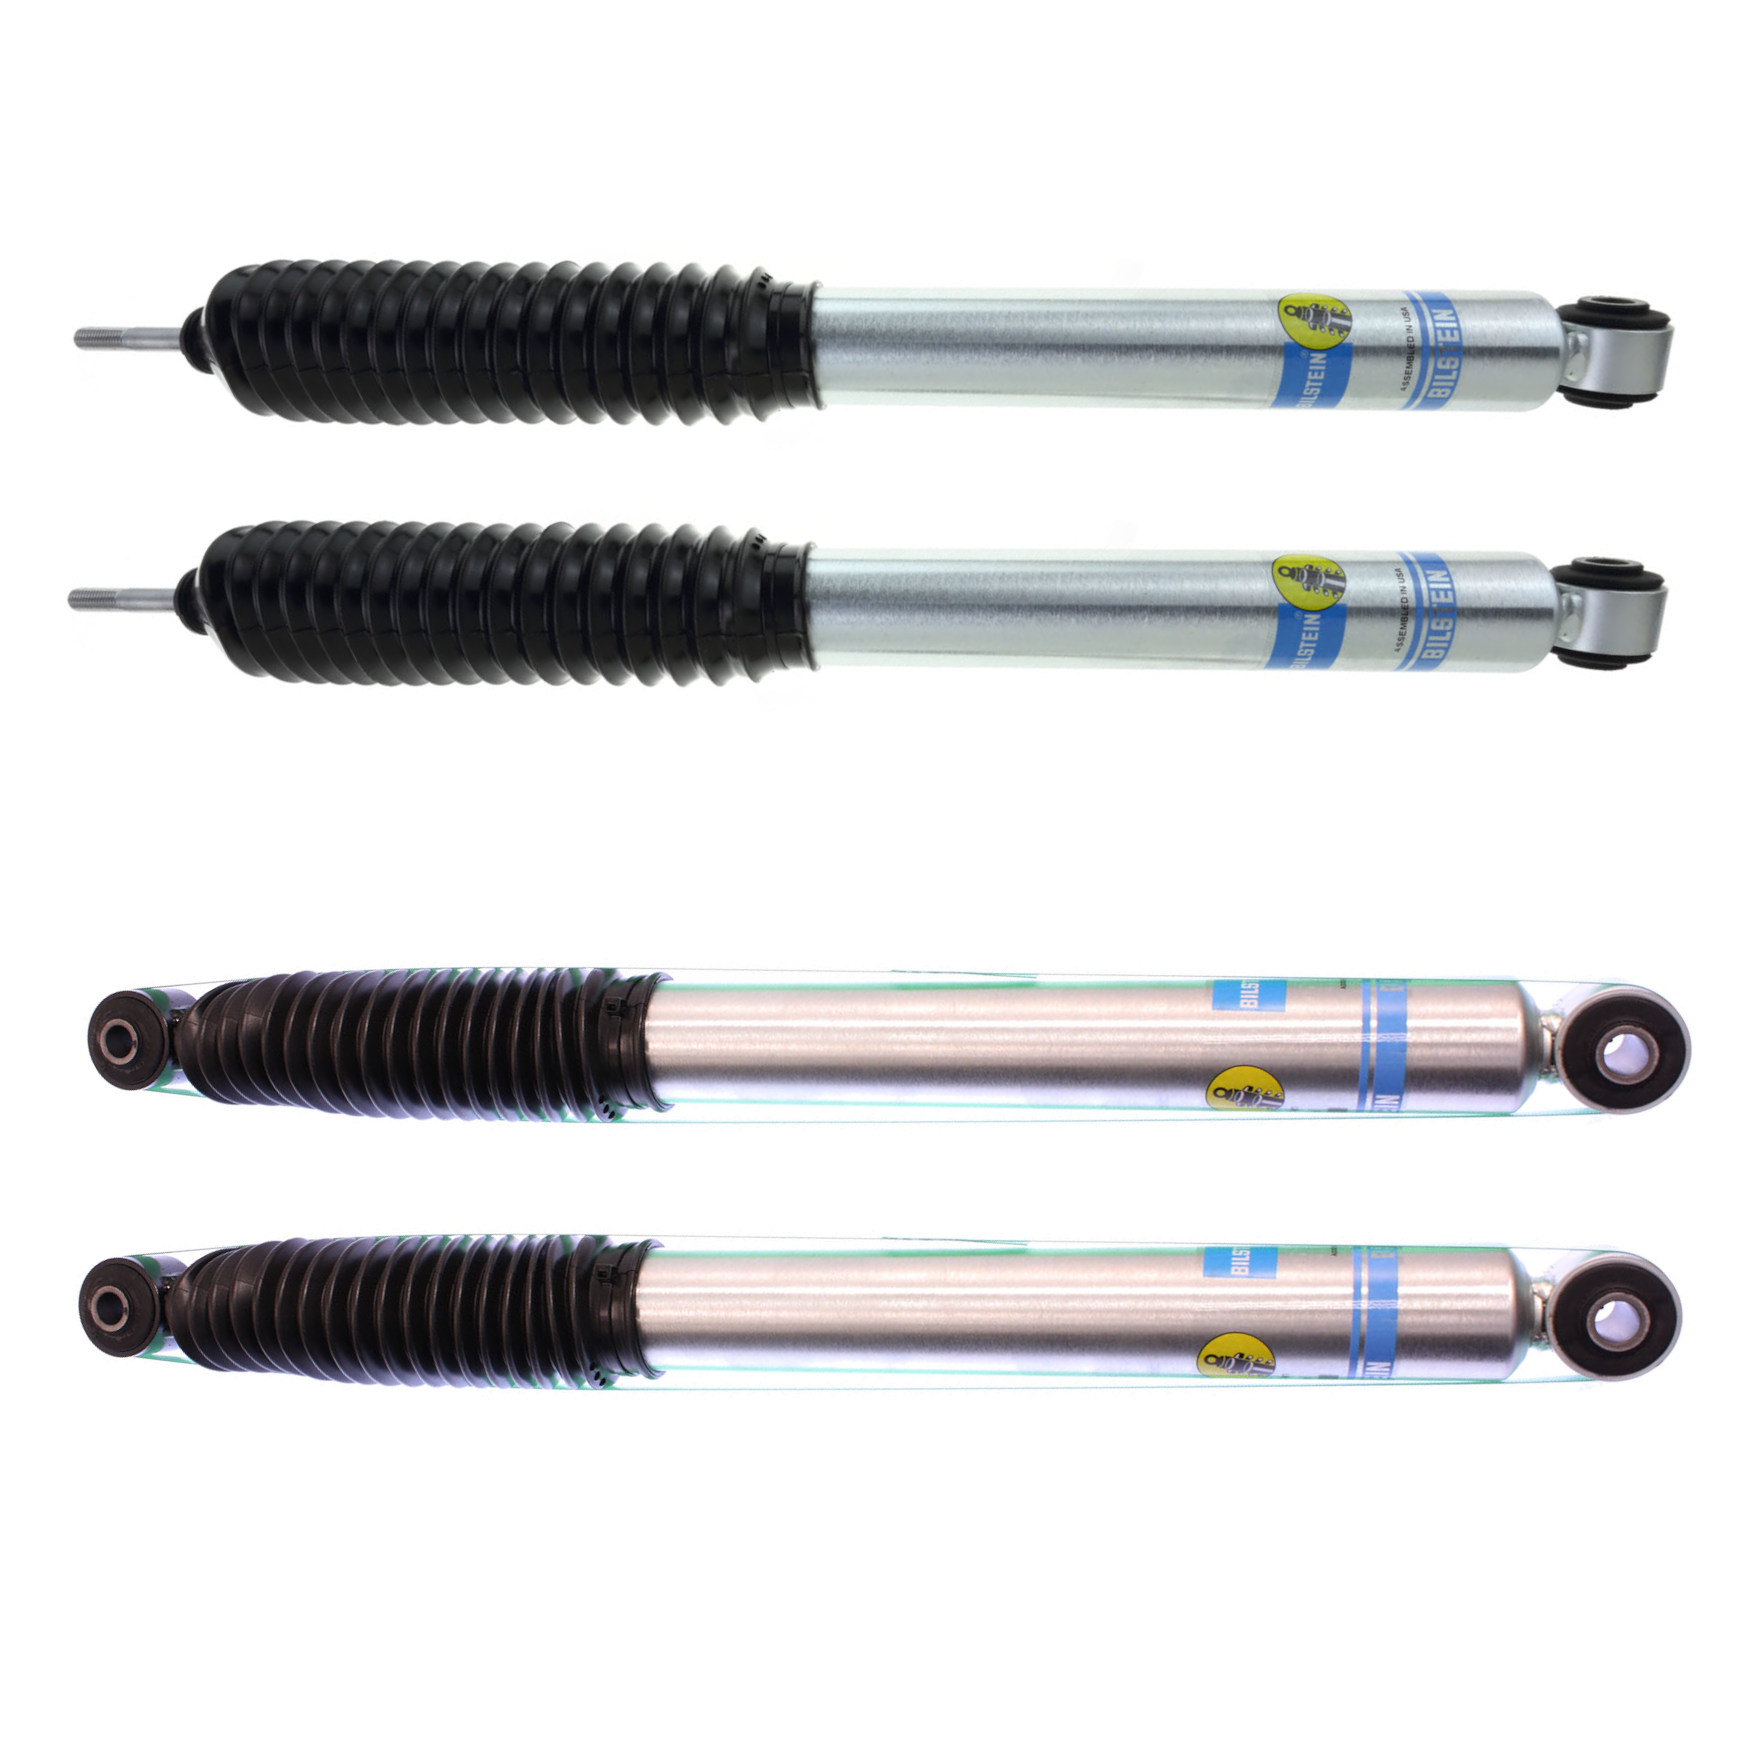 Bilstein B8 5100 Front and Rear Shocks For 2